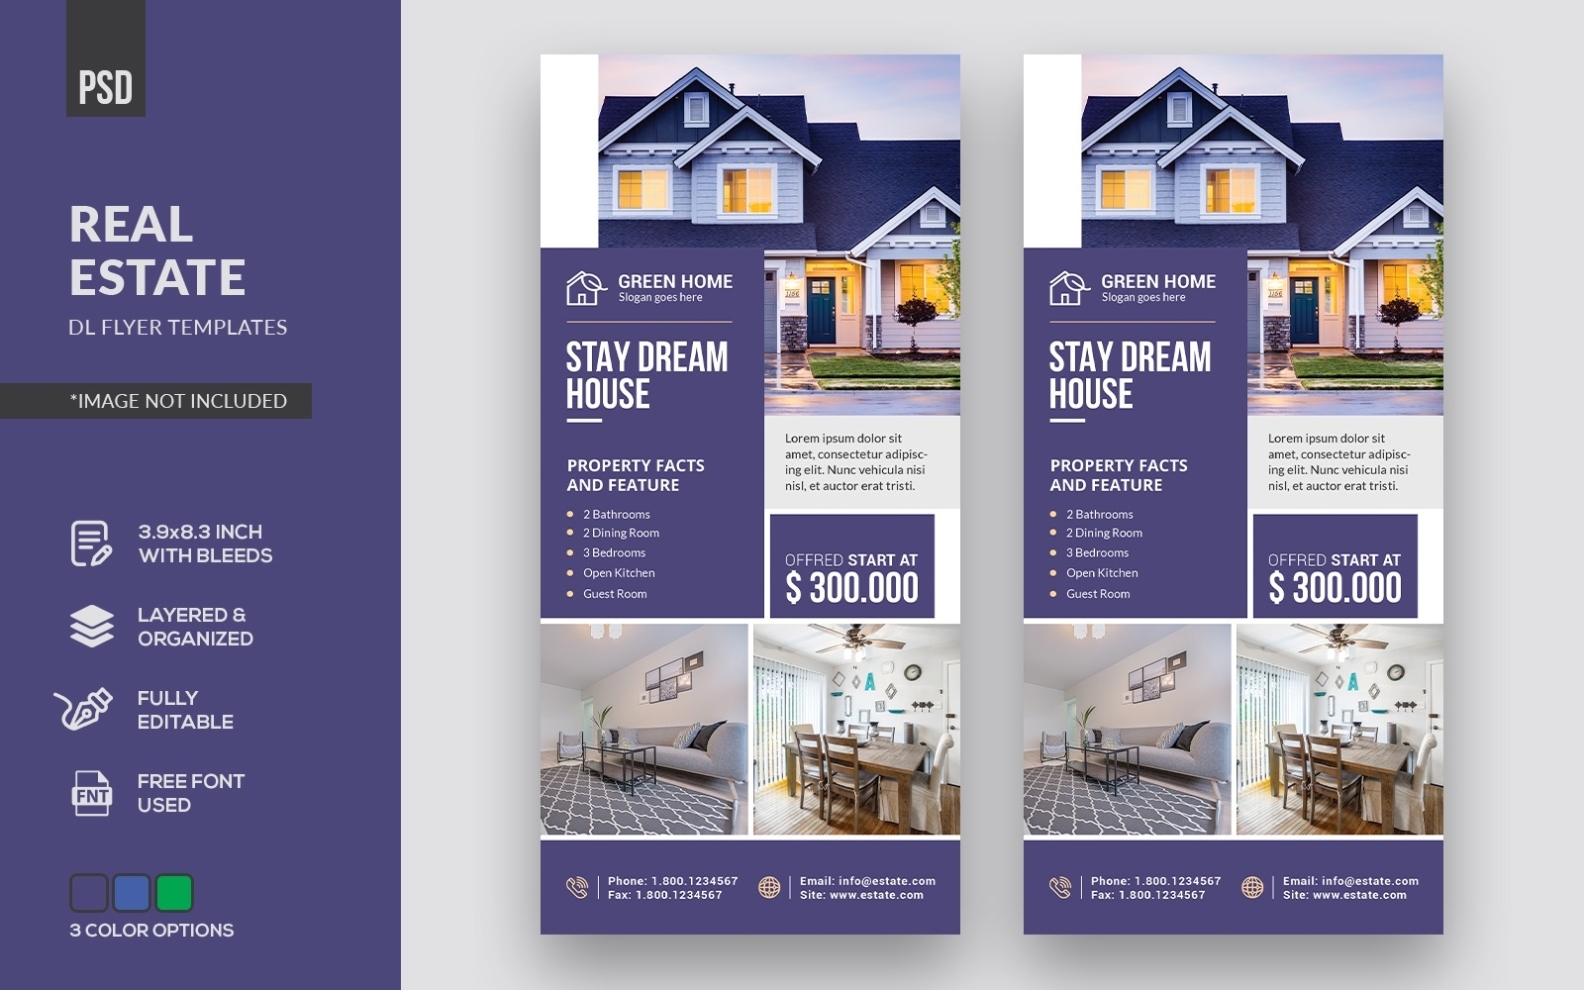 Real Estate Dl Flyer' – Corporate Identity Template With Dl Size Flyer Template